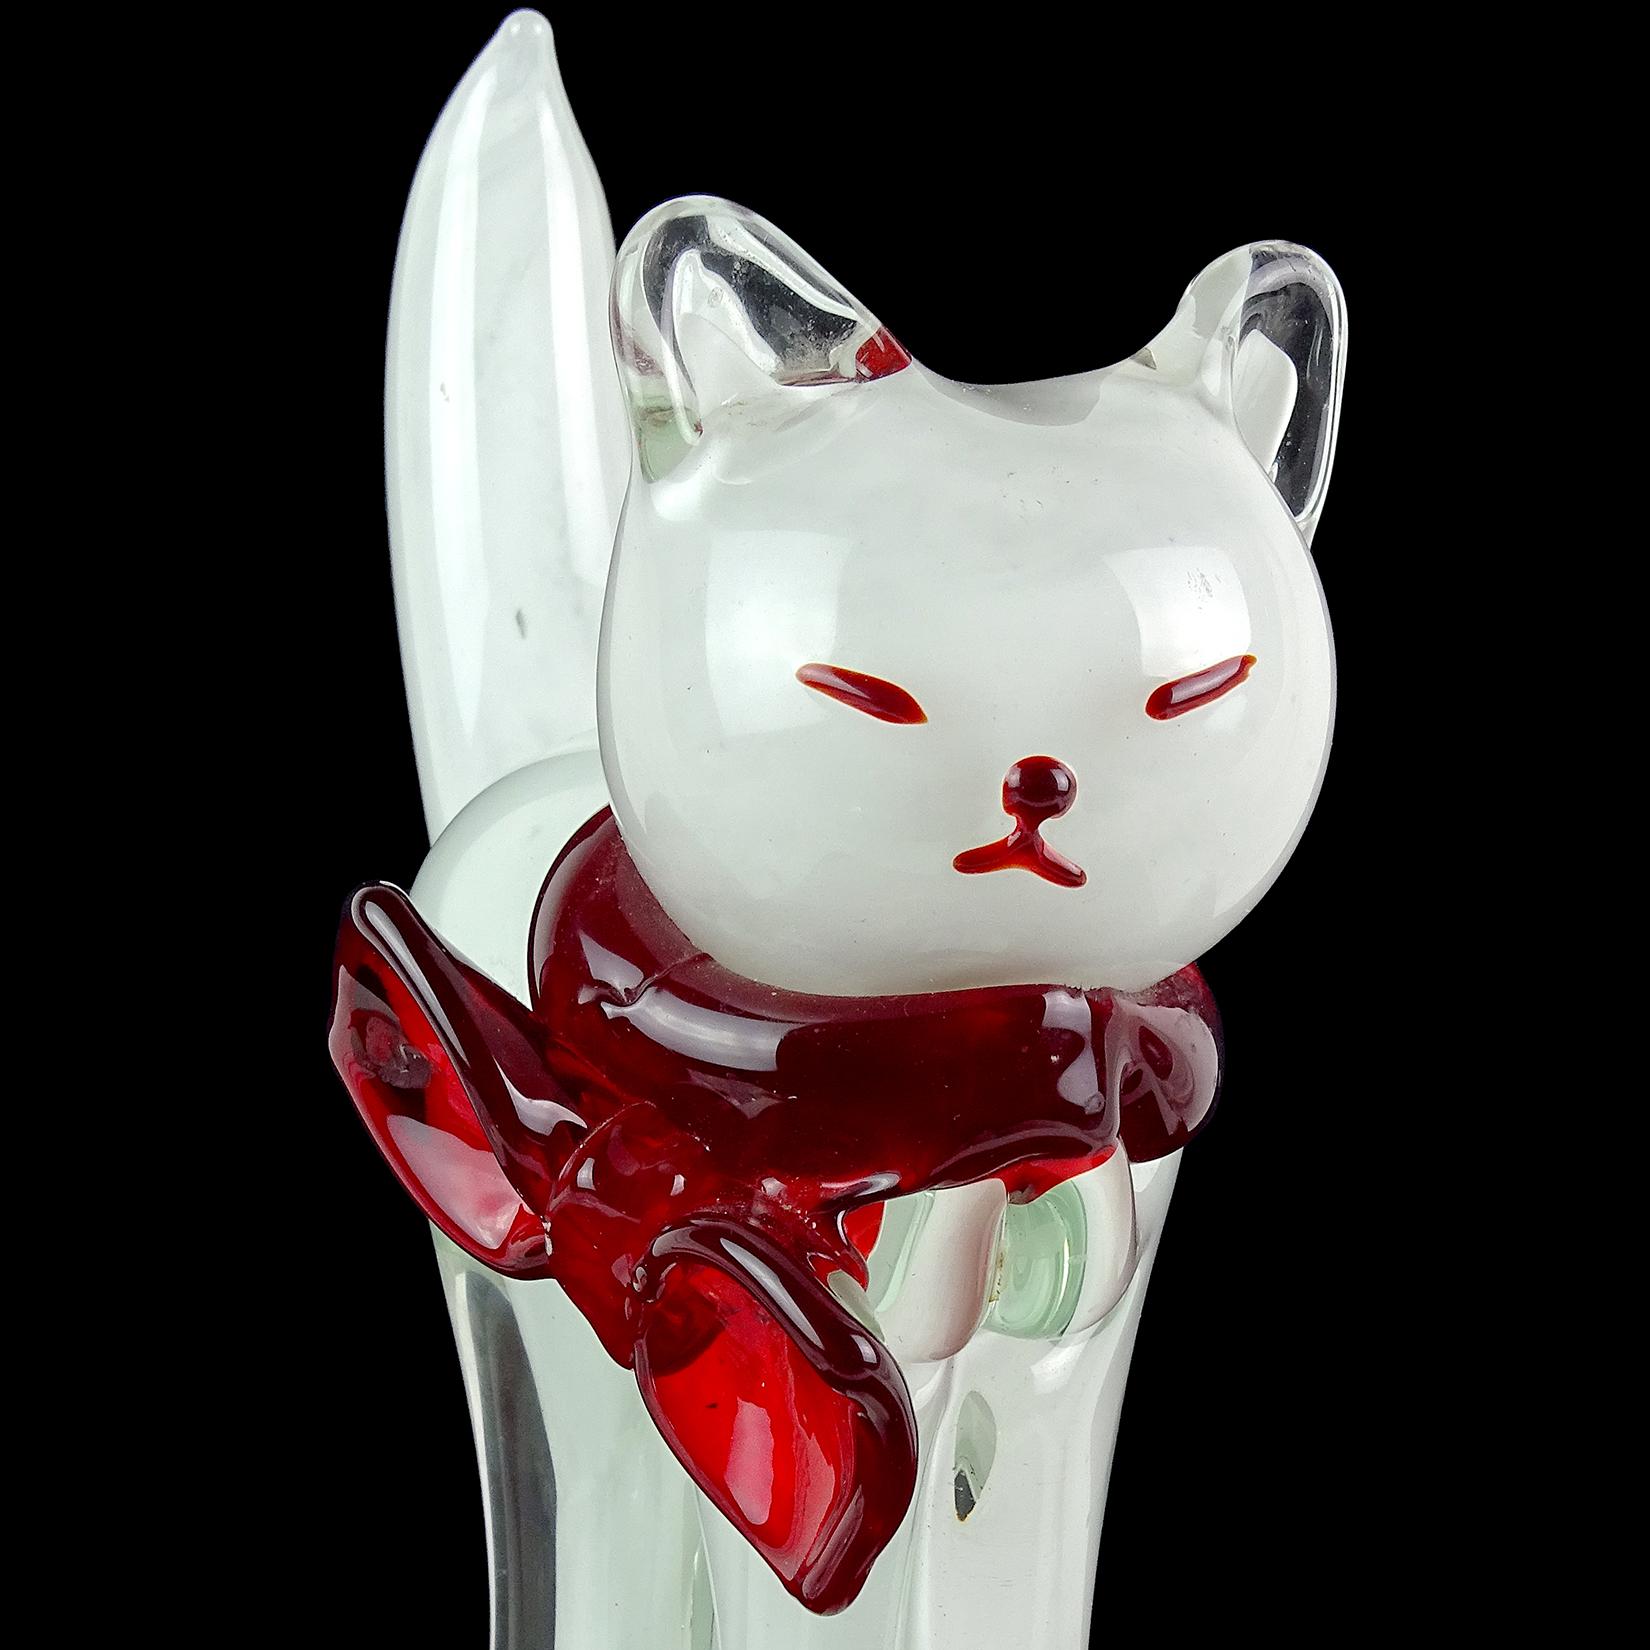 Beautiful and extra large, vintage Murano hand blown clear glass over white Italian art glass kitty cat sculpture. It has red accents for its cute face, and a large red bow on its neck. The cat stands on a large clear glass base that encompasses its